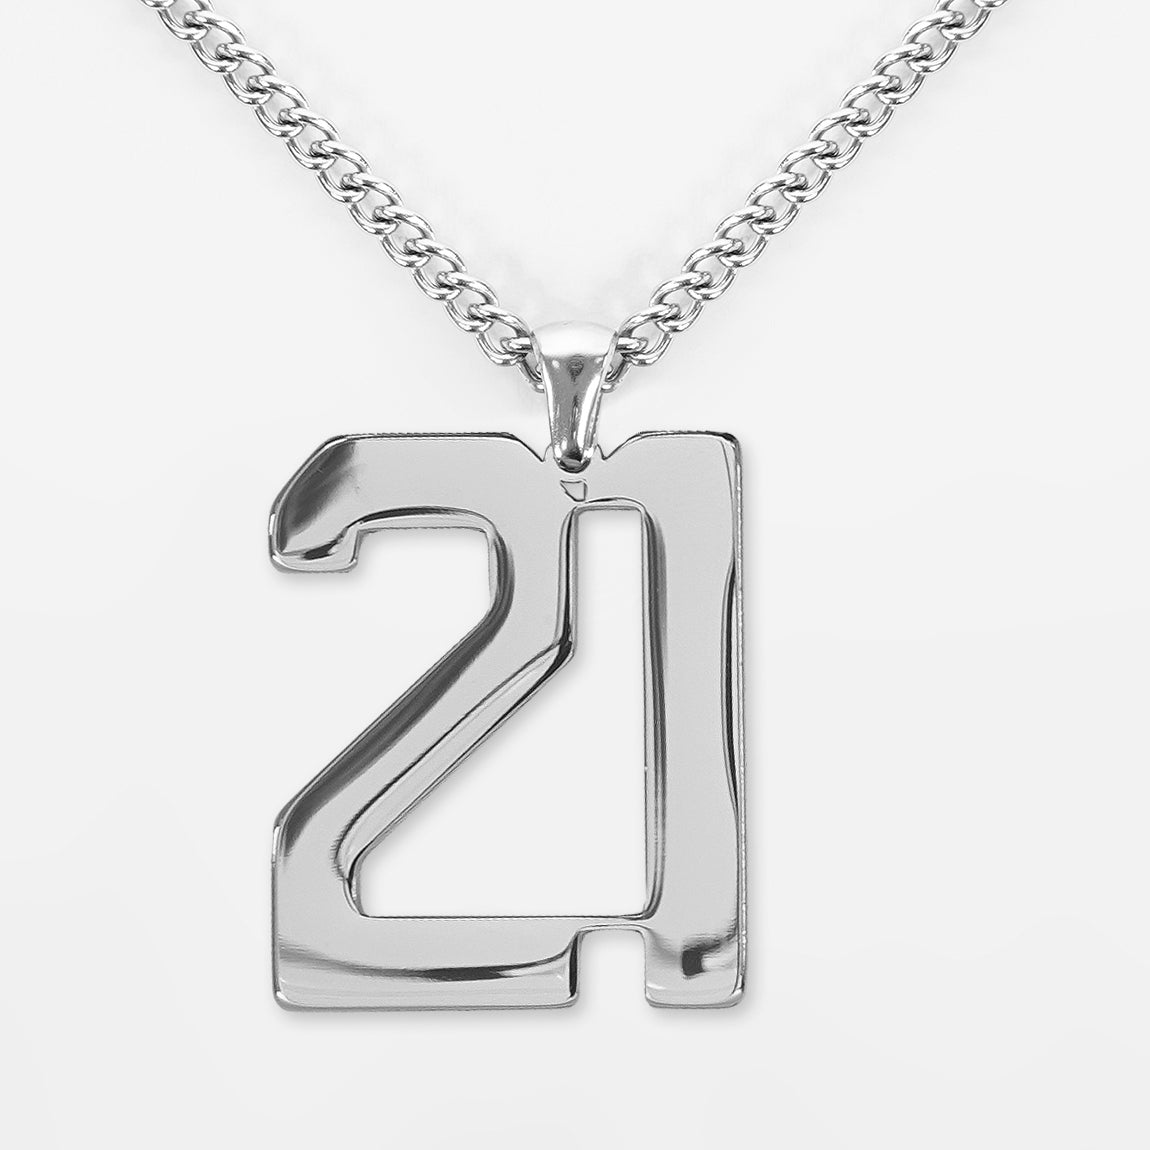 21 Number Pendant with Chain Necklace - Stainless Steel